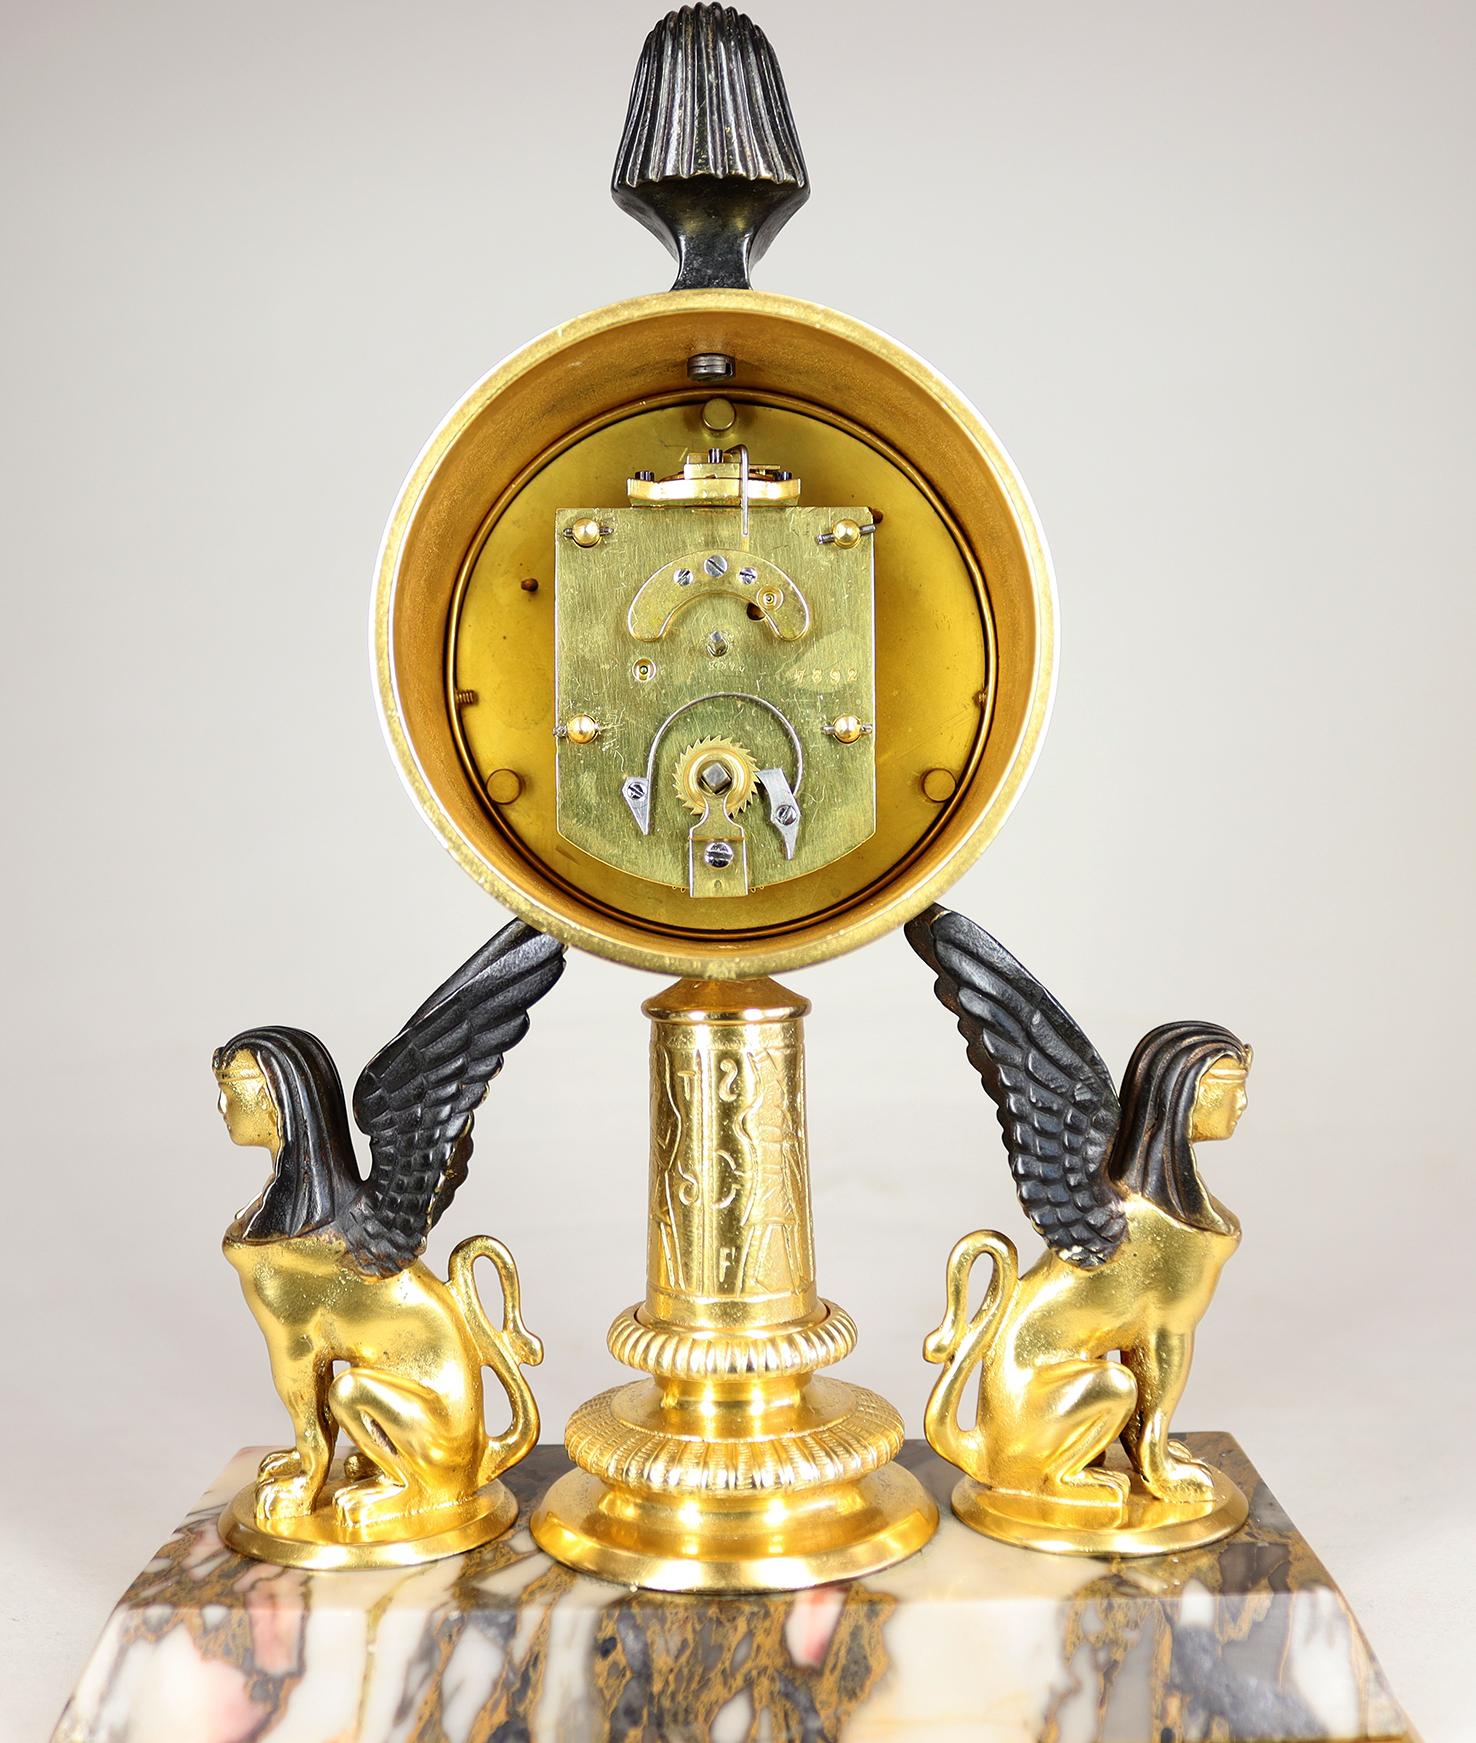 19th Century A Gilded Egyptian Revival Timepiece Desk Clock For Sale